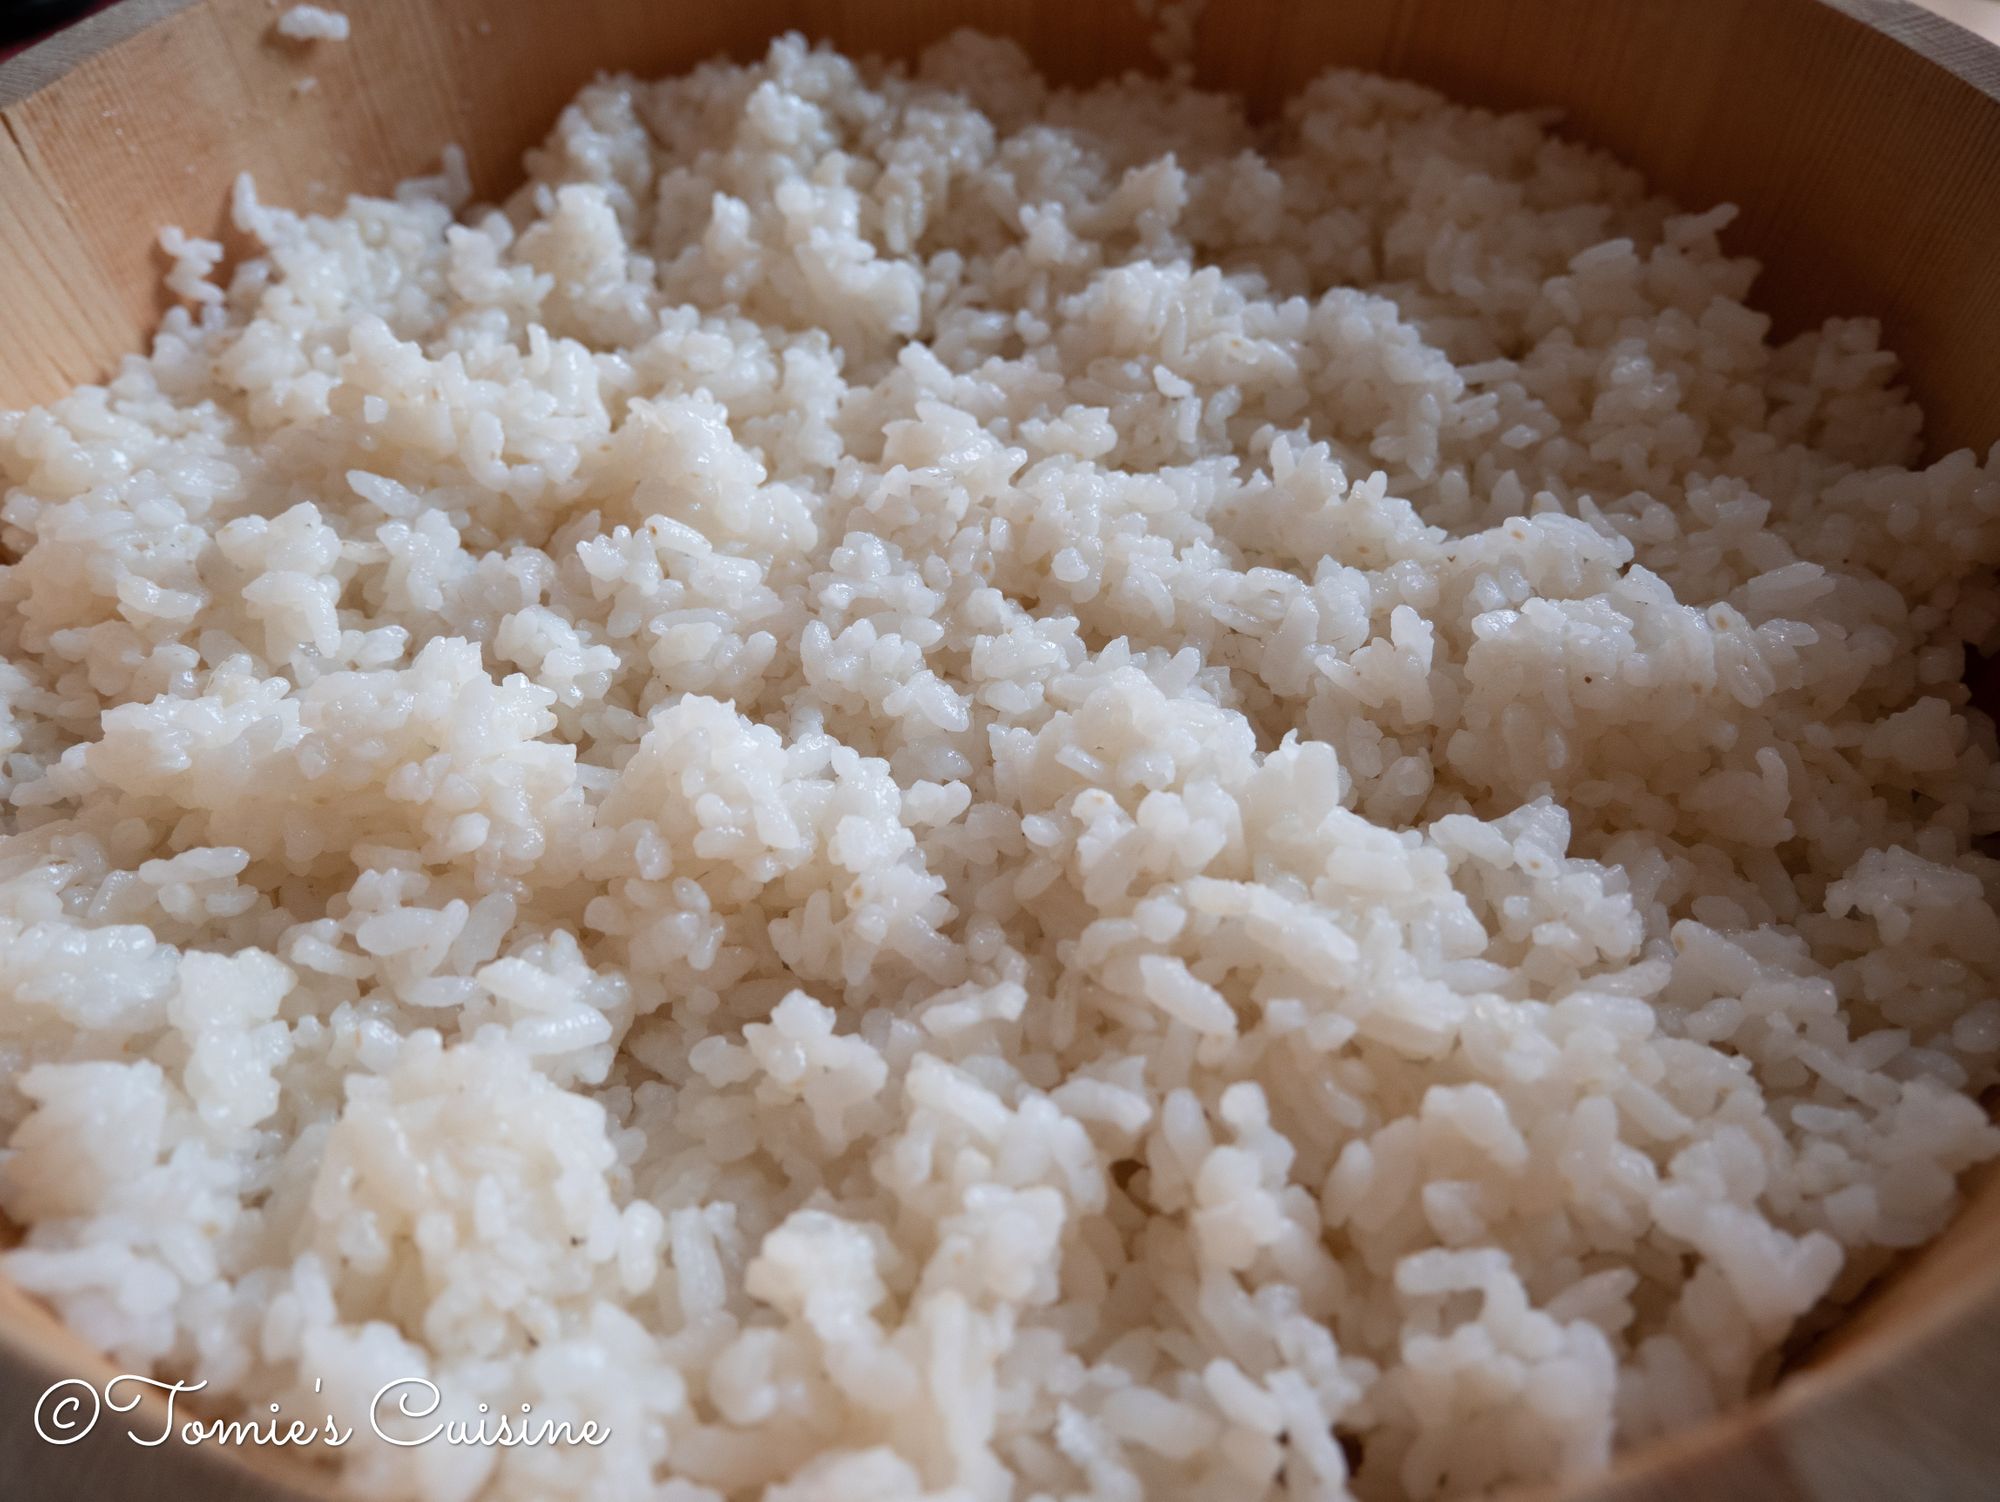 Last result of the sushi rice. Can you see? The rice is a little bit shiny.